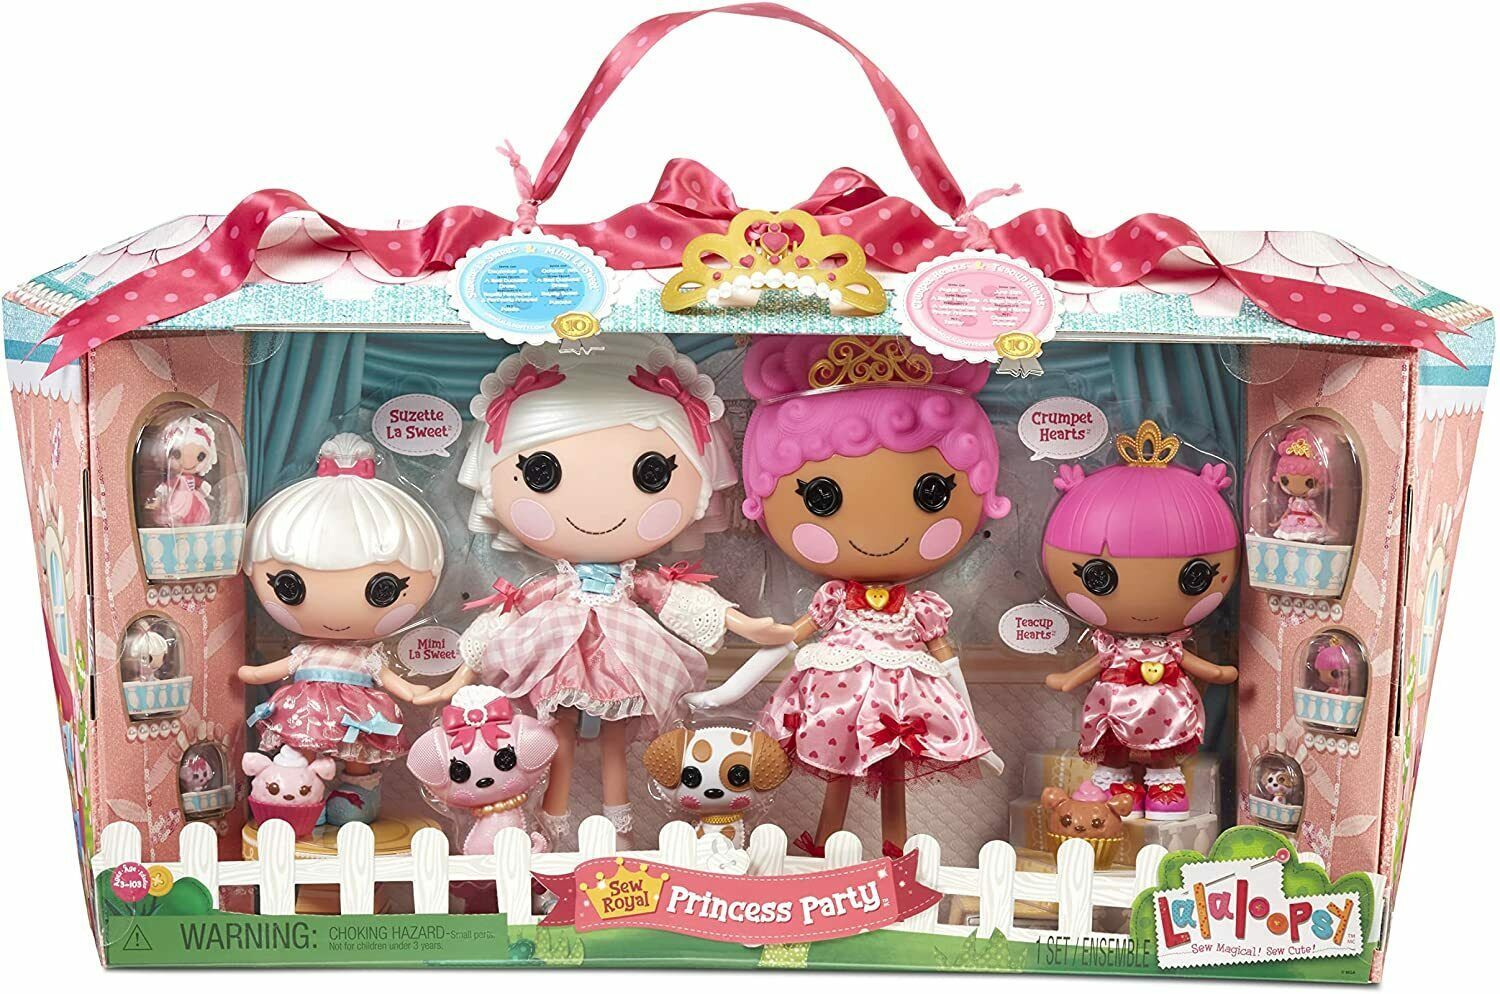 Lalaloopsy Sew Royal Princess Party 8 Pack - Crumpet & Teacup Hearts + Suzette &